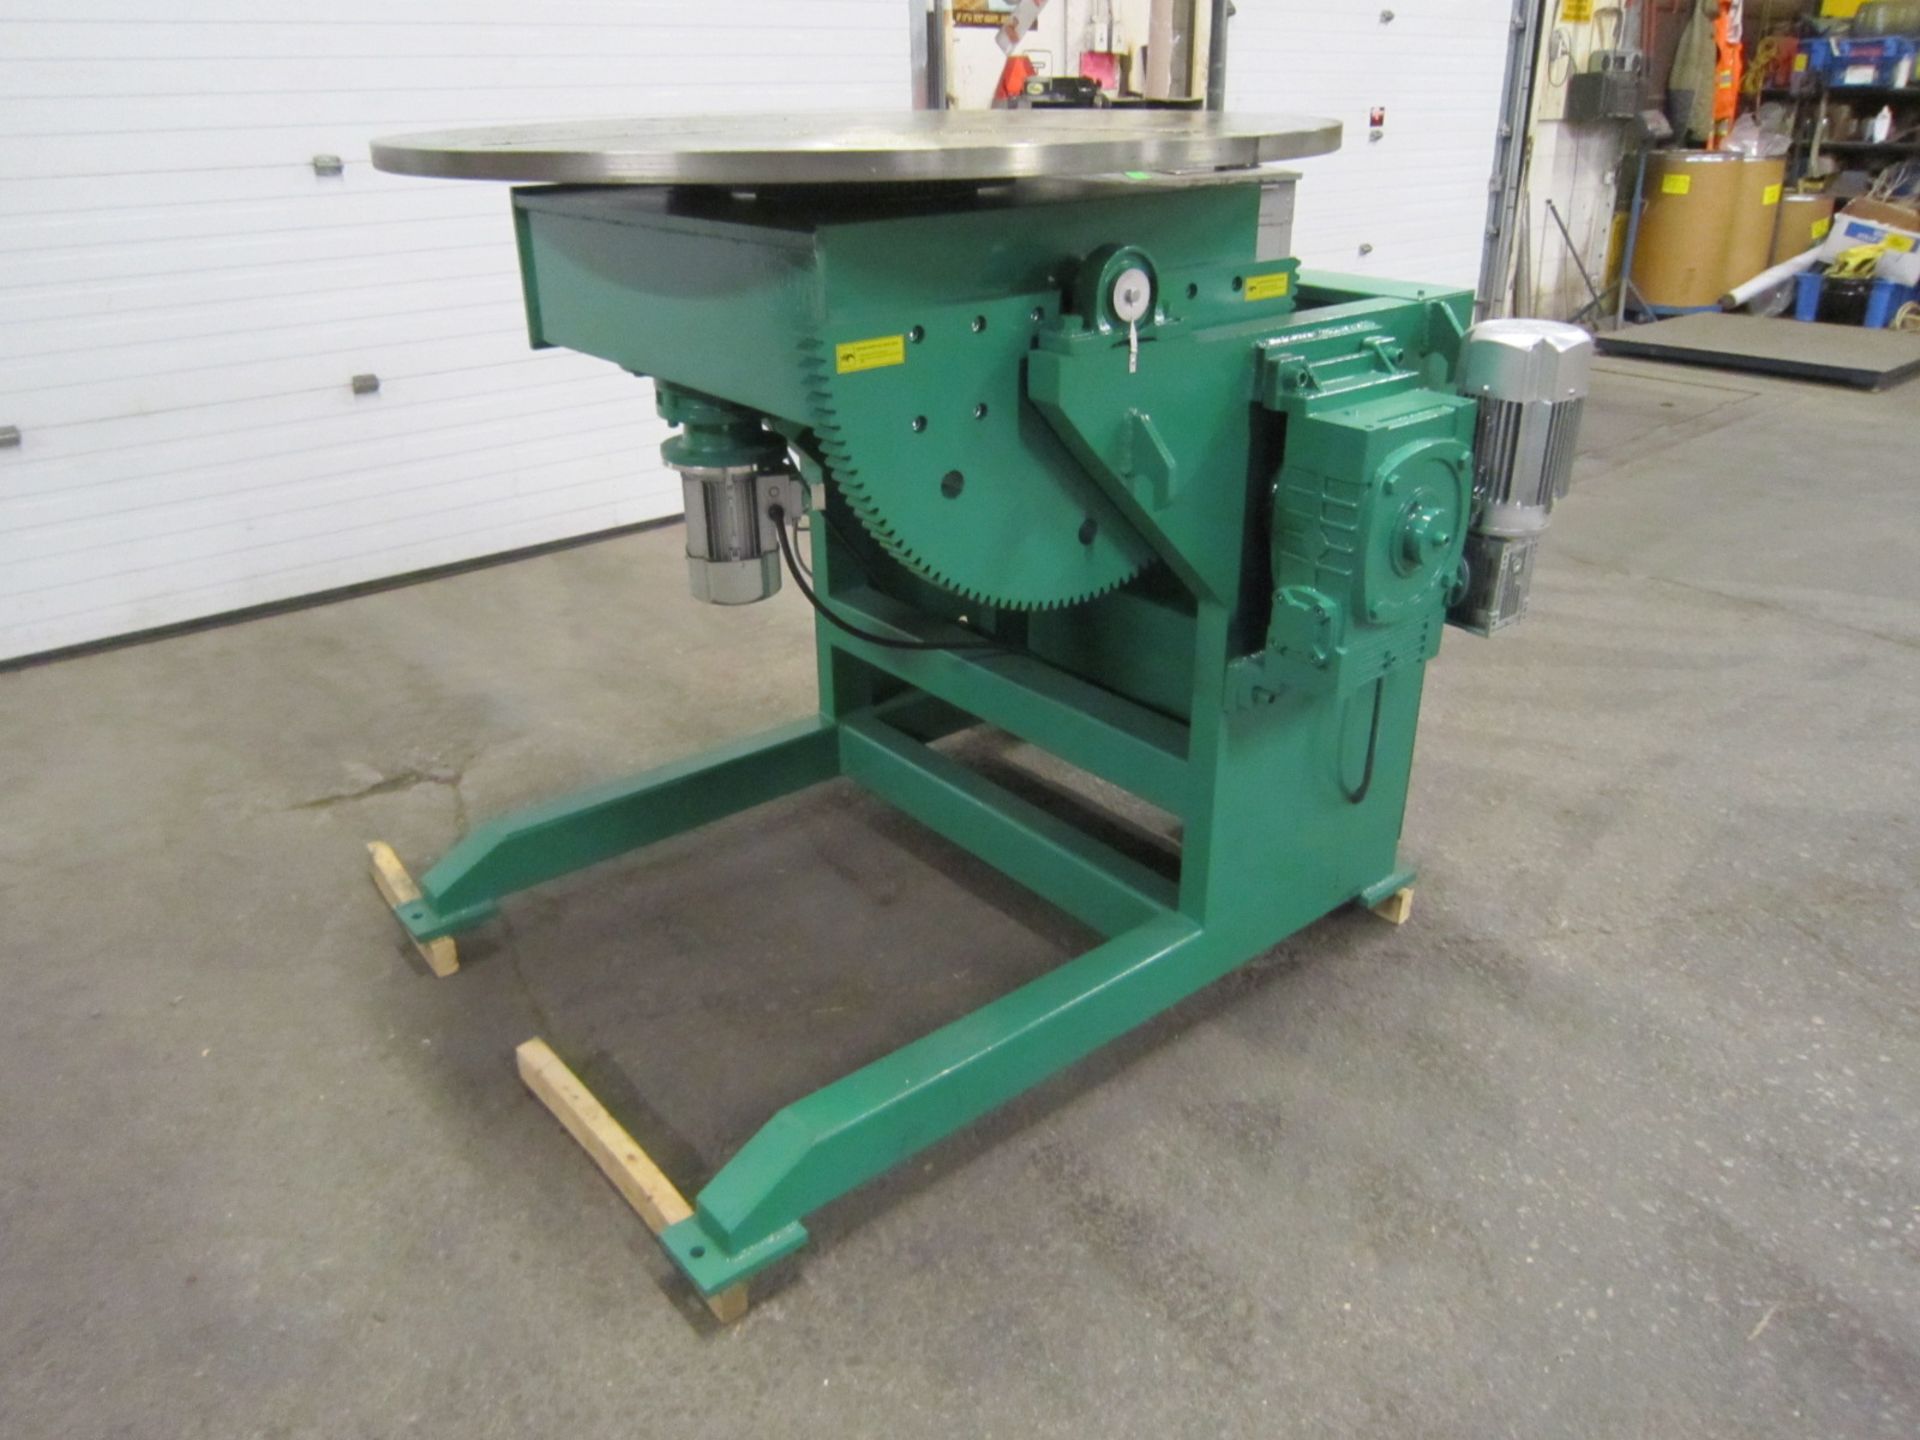 Verner model VD-5000 WELDING POSITIONER 5000lbs capacity - tilt and rotate with variable speed drive